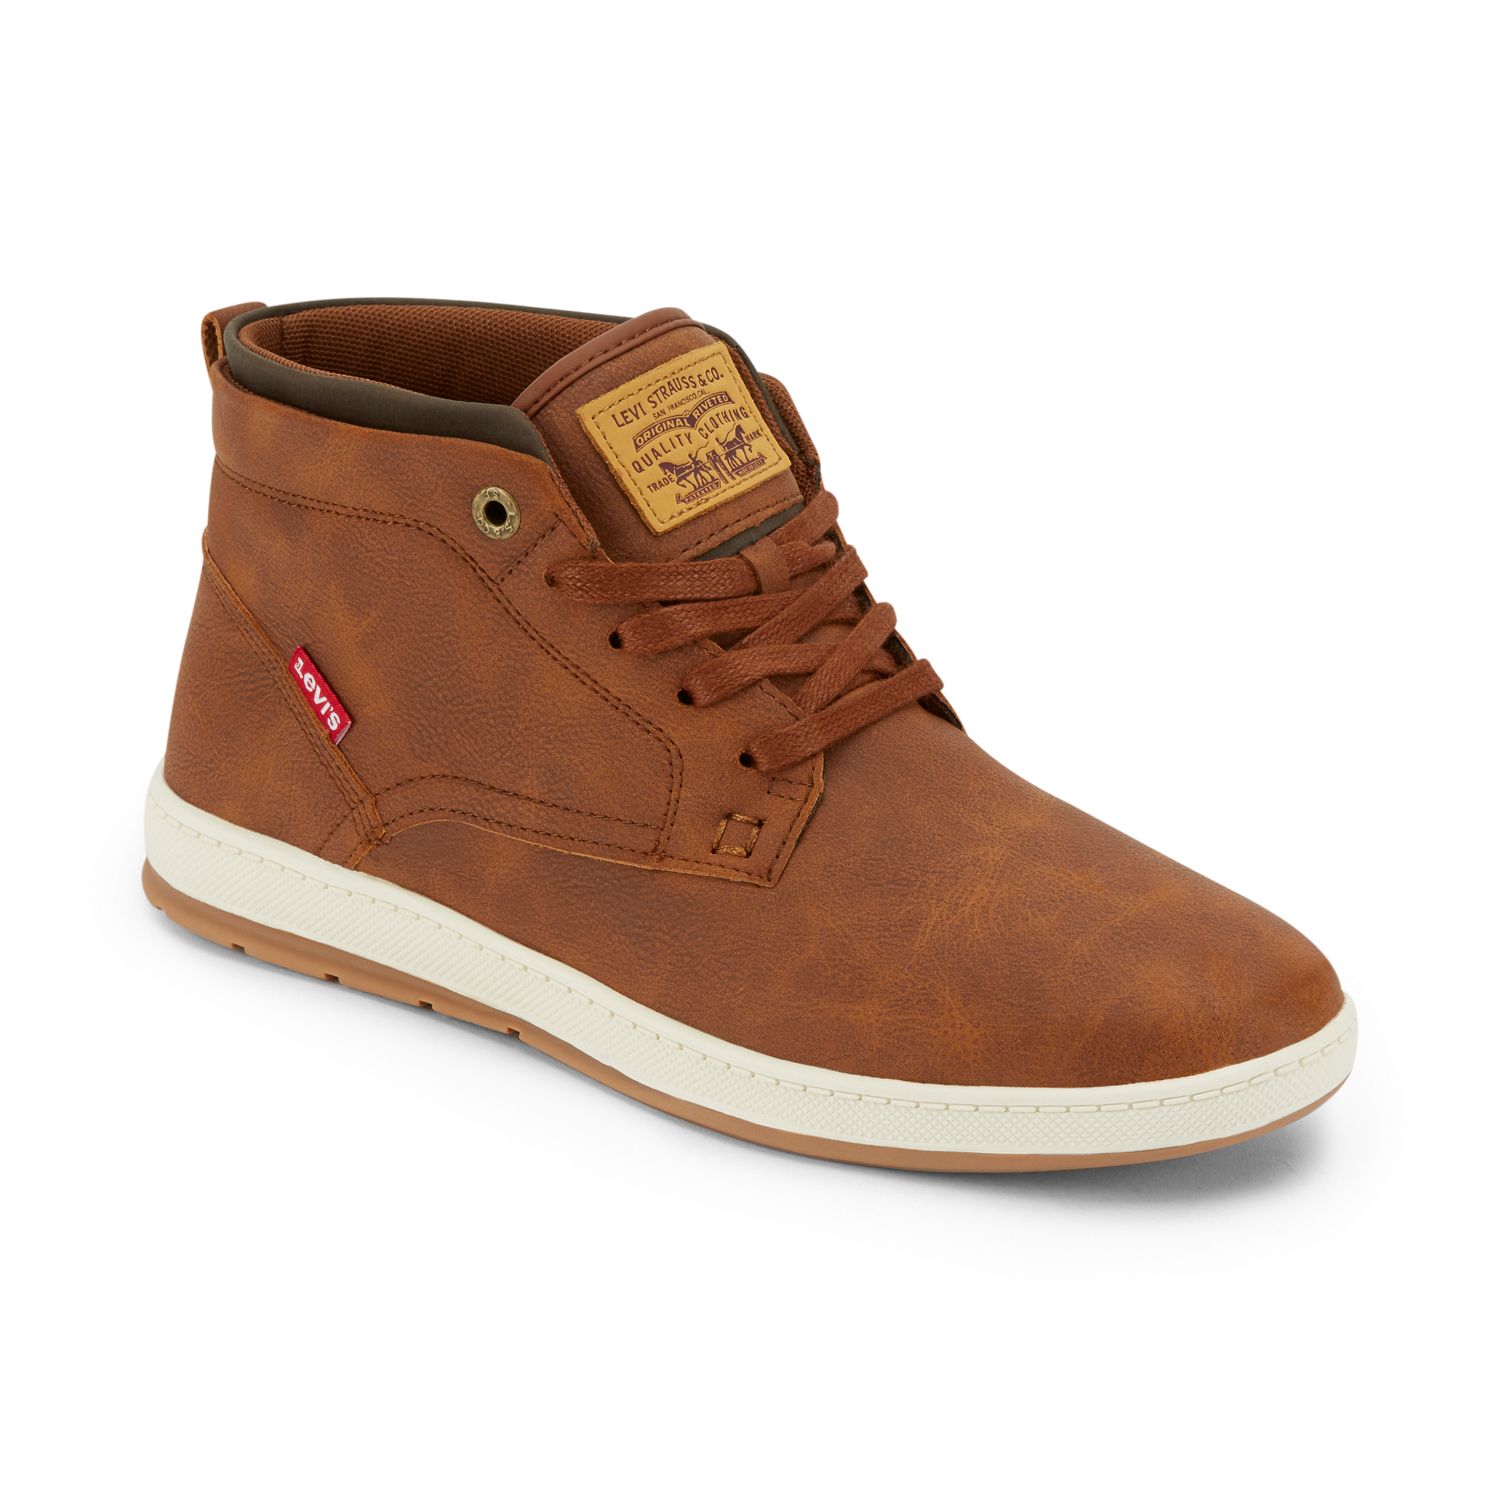 Image for Levi's Goshen Waxed UL NB Men's Sneaker Boots at Kohl's.